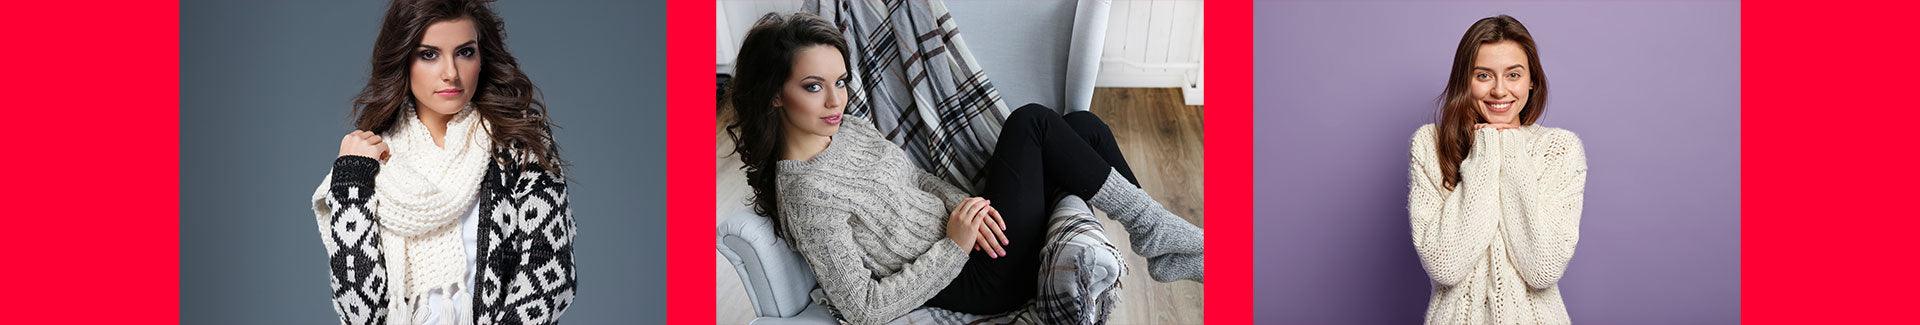 Buy Sweaters & Knitwear for Women at Best Prices - Daily Fashion